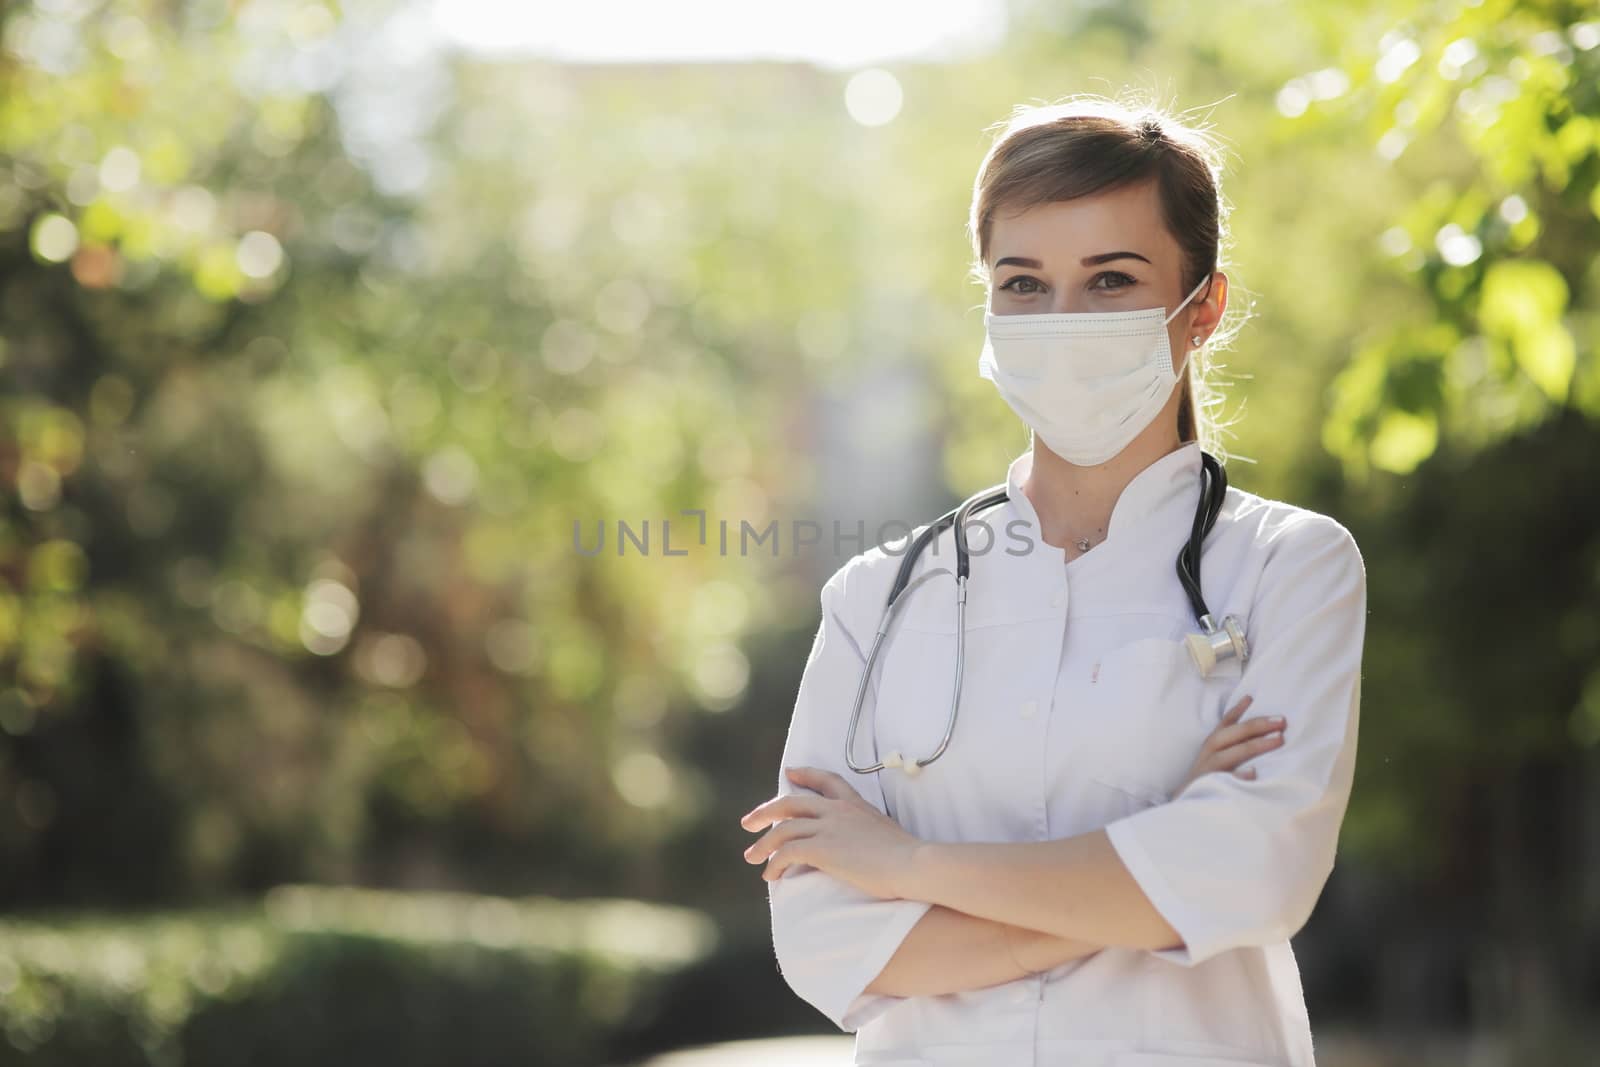 Woman doctor or nurse in a face protective mask in the park among the trees. Safety measures against the coronavirus. Prevention Covid-19 healthcare concept. Stethoscope over the neck. Woman, girl.